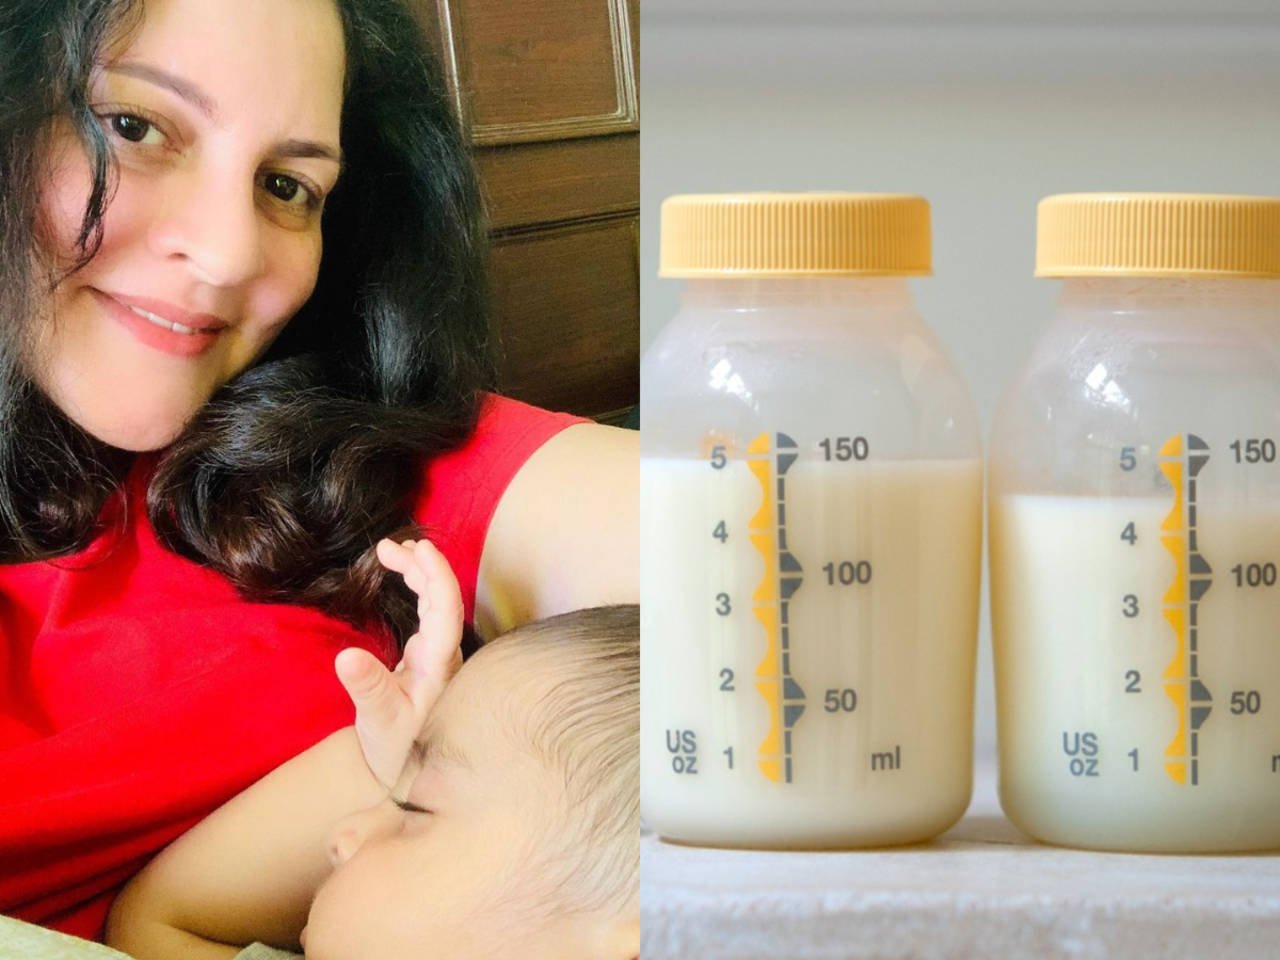 Mothers Day special By donating her breast milk, this mother is giving life to so many babies photo